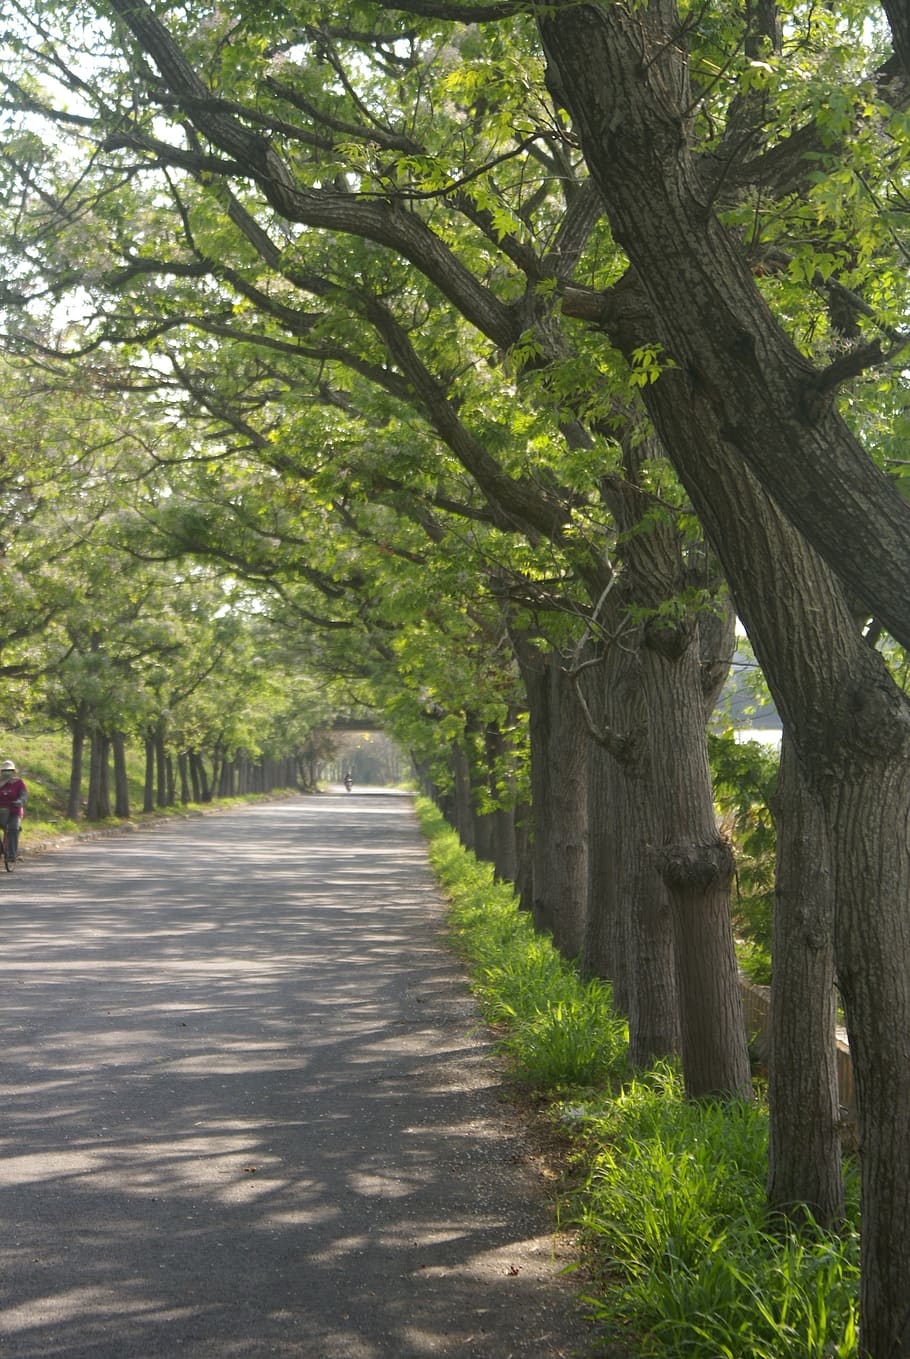 neem tree, woods, trees, country lanes, tree, plant, nature, direction, road, outdoors